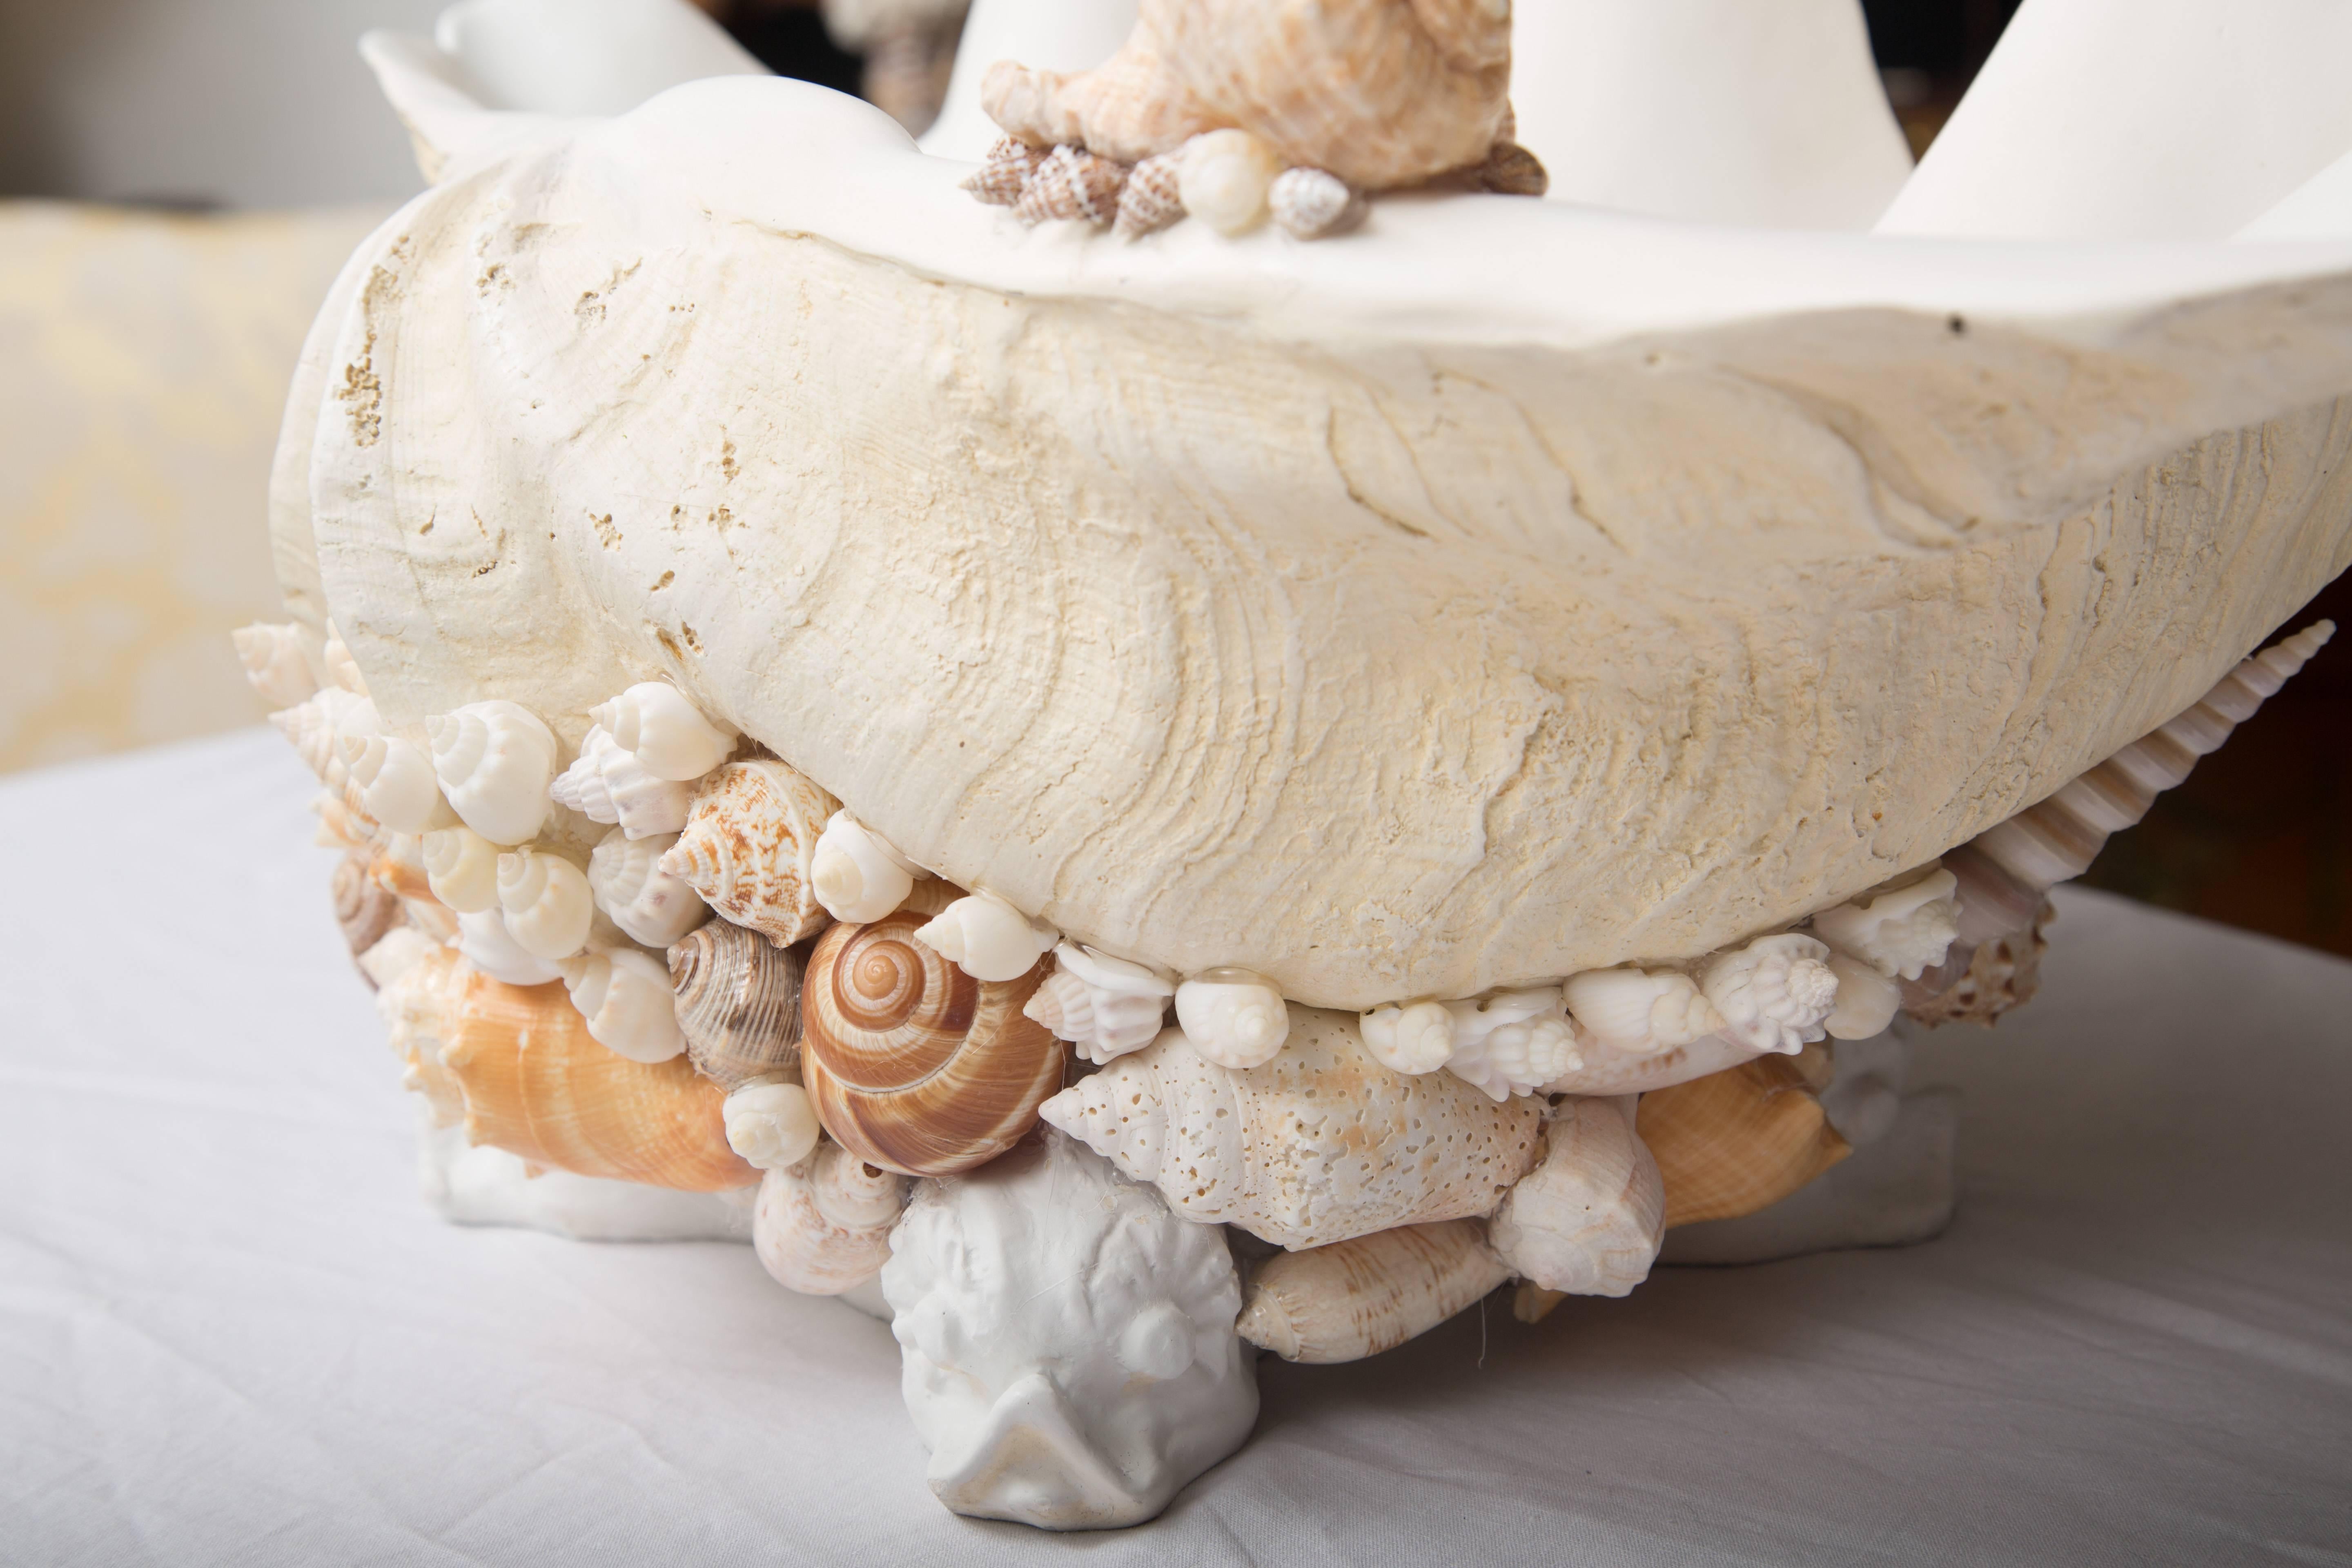 Hand-Carved Decorative Shell Encrusted Composition Clam Shell with Natural Sea Shells